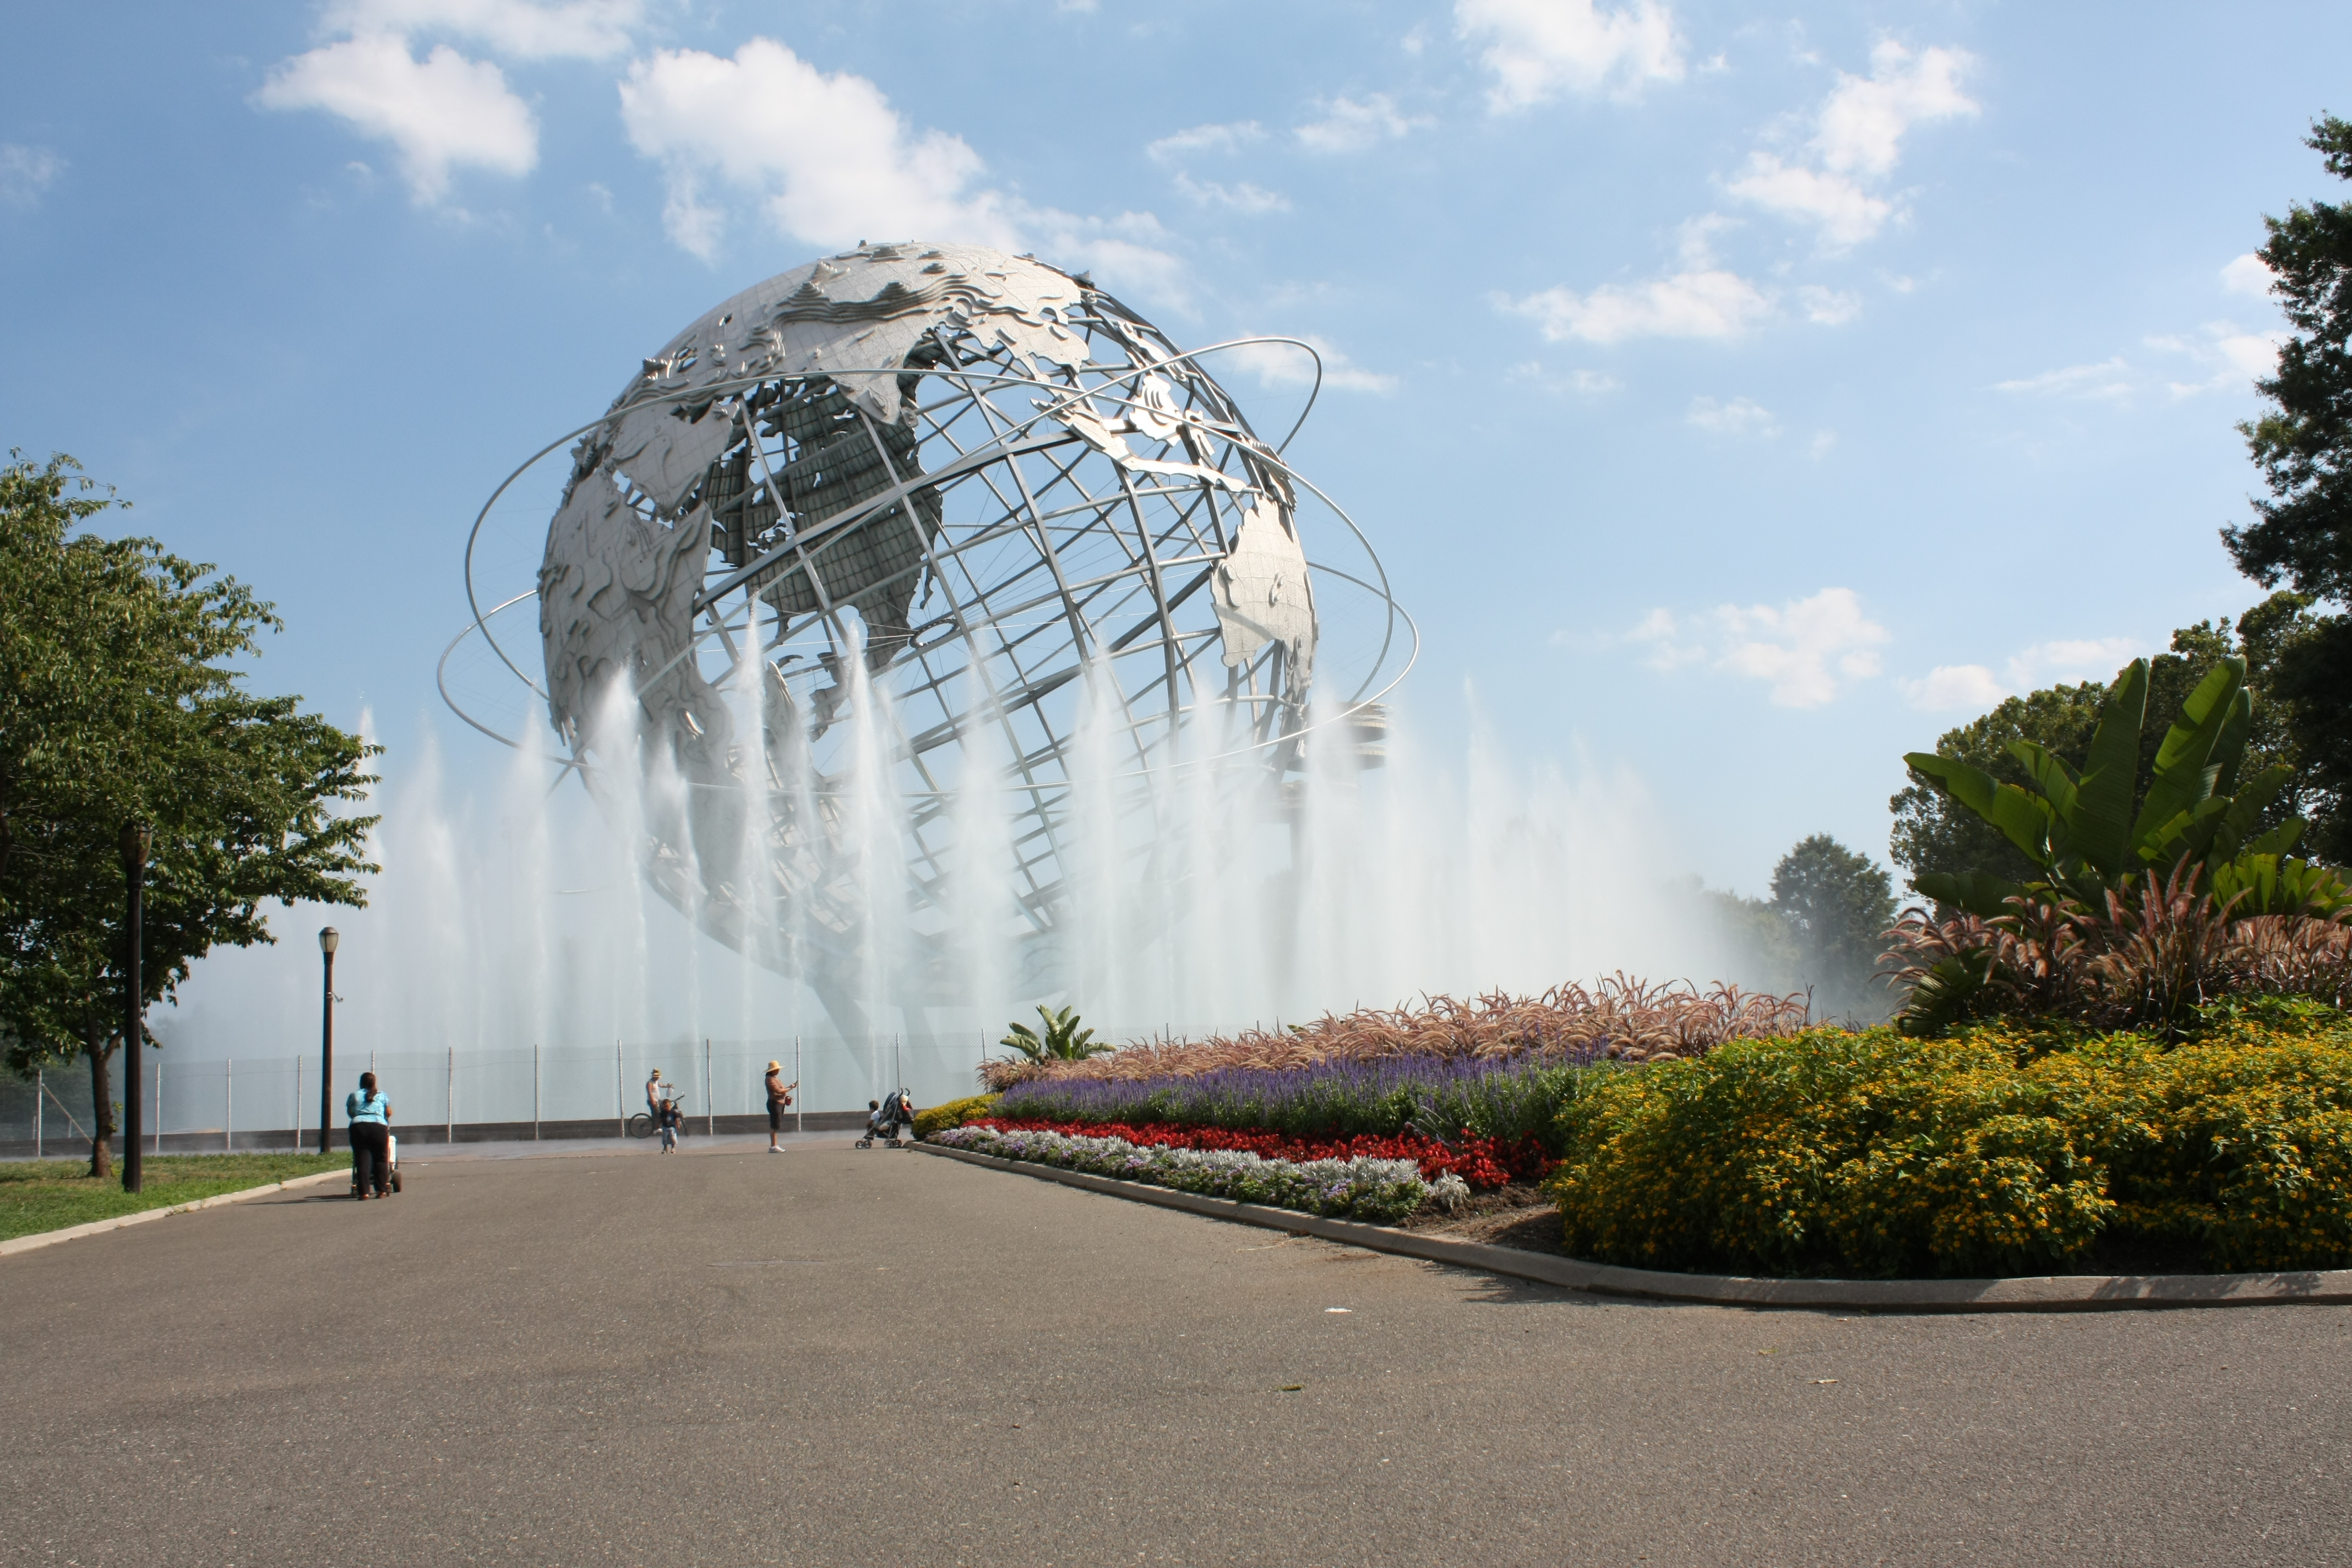 The Unisphere in Flushing Meadows-Corona Park, Queens, New York. Photo taken on July 31, 2010.